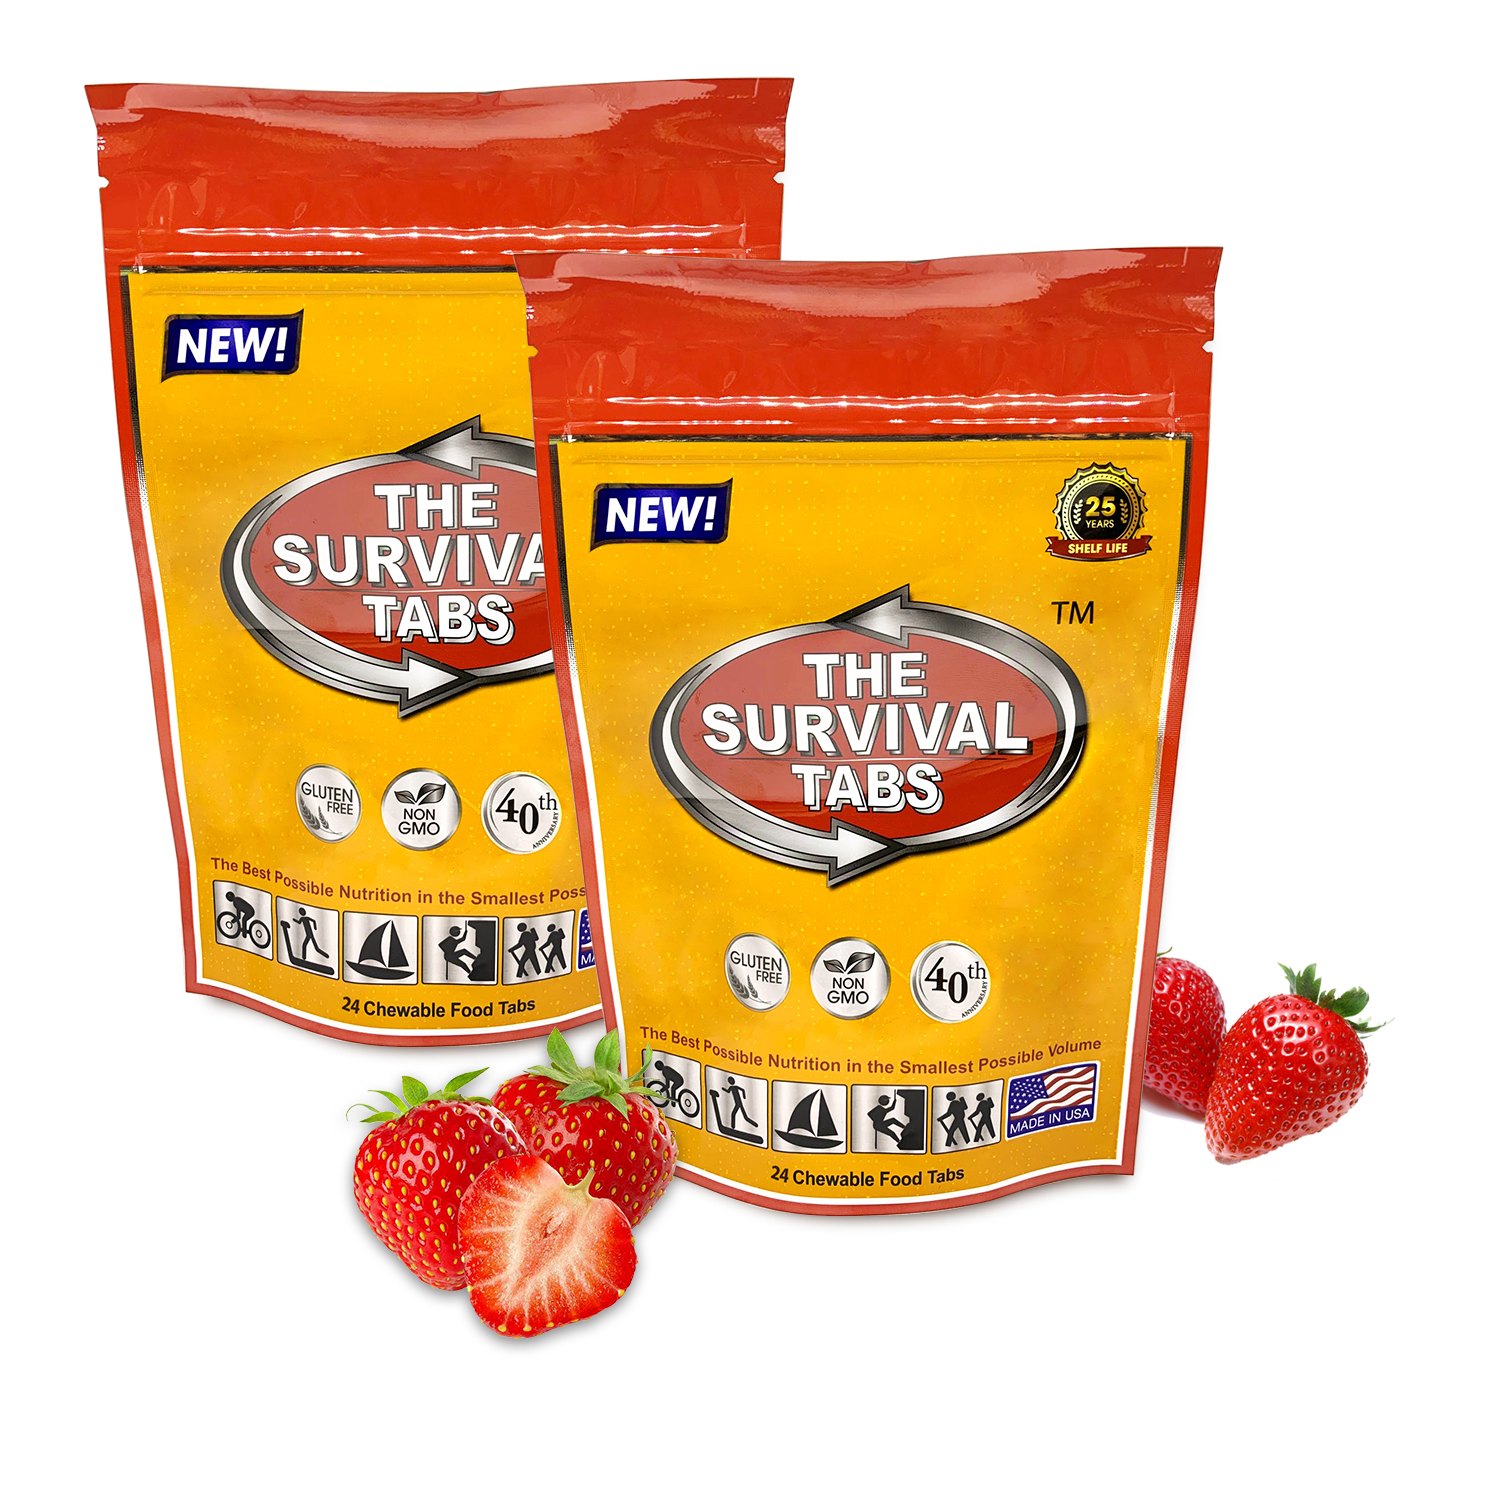 With The Survival Tabs, beating those hunger pangs aren’t as challenging as you think!